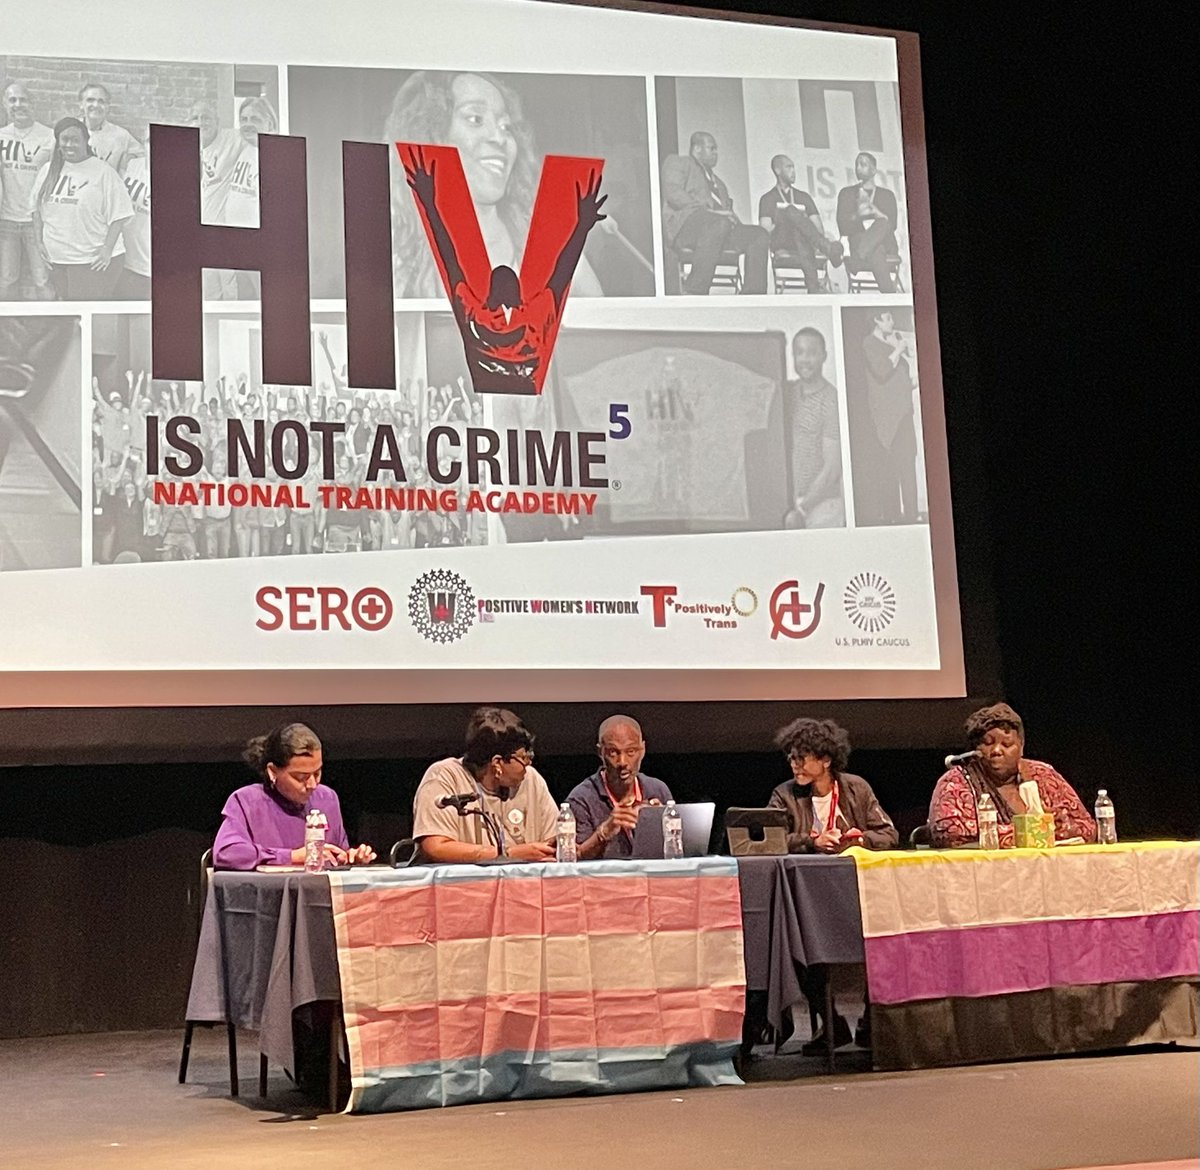 Great #HINAC5 panel on abolition & conceiving of alternative visions of the future that do not rely on policing, punishment and incarceration. 

#HIVIsNotACrime